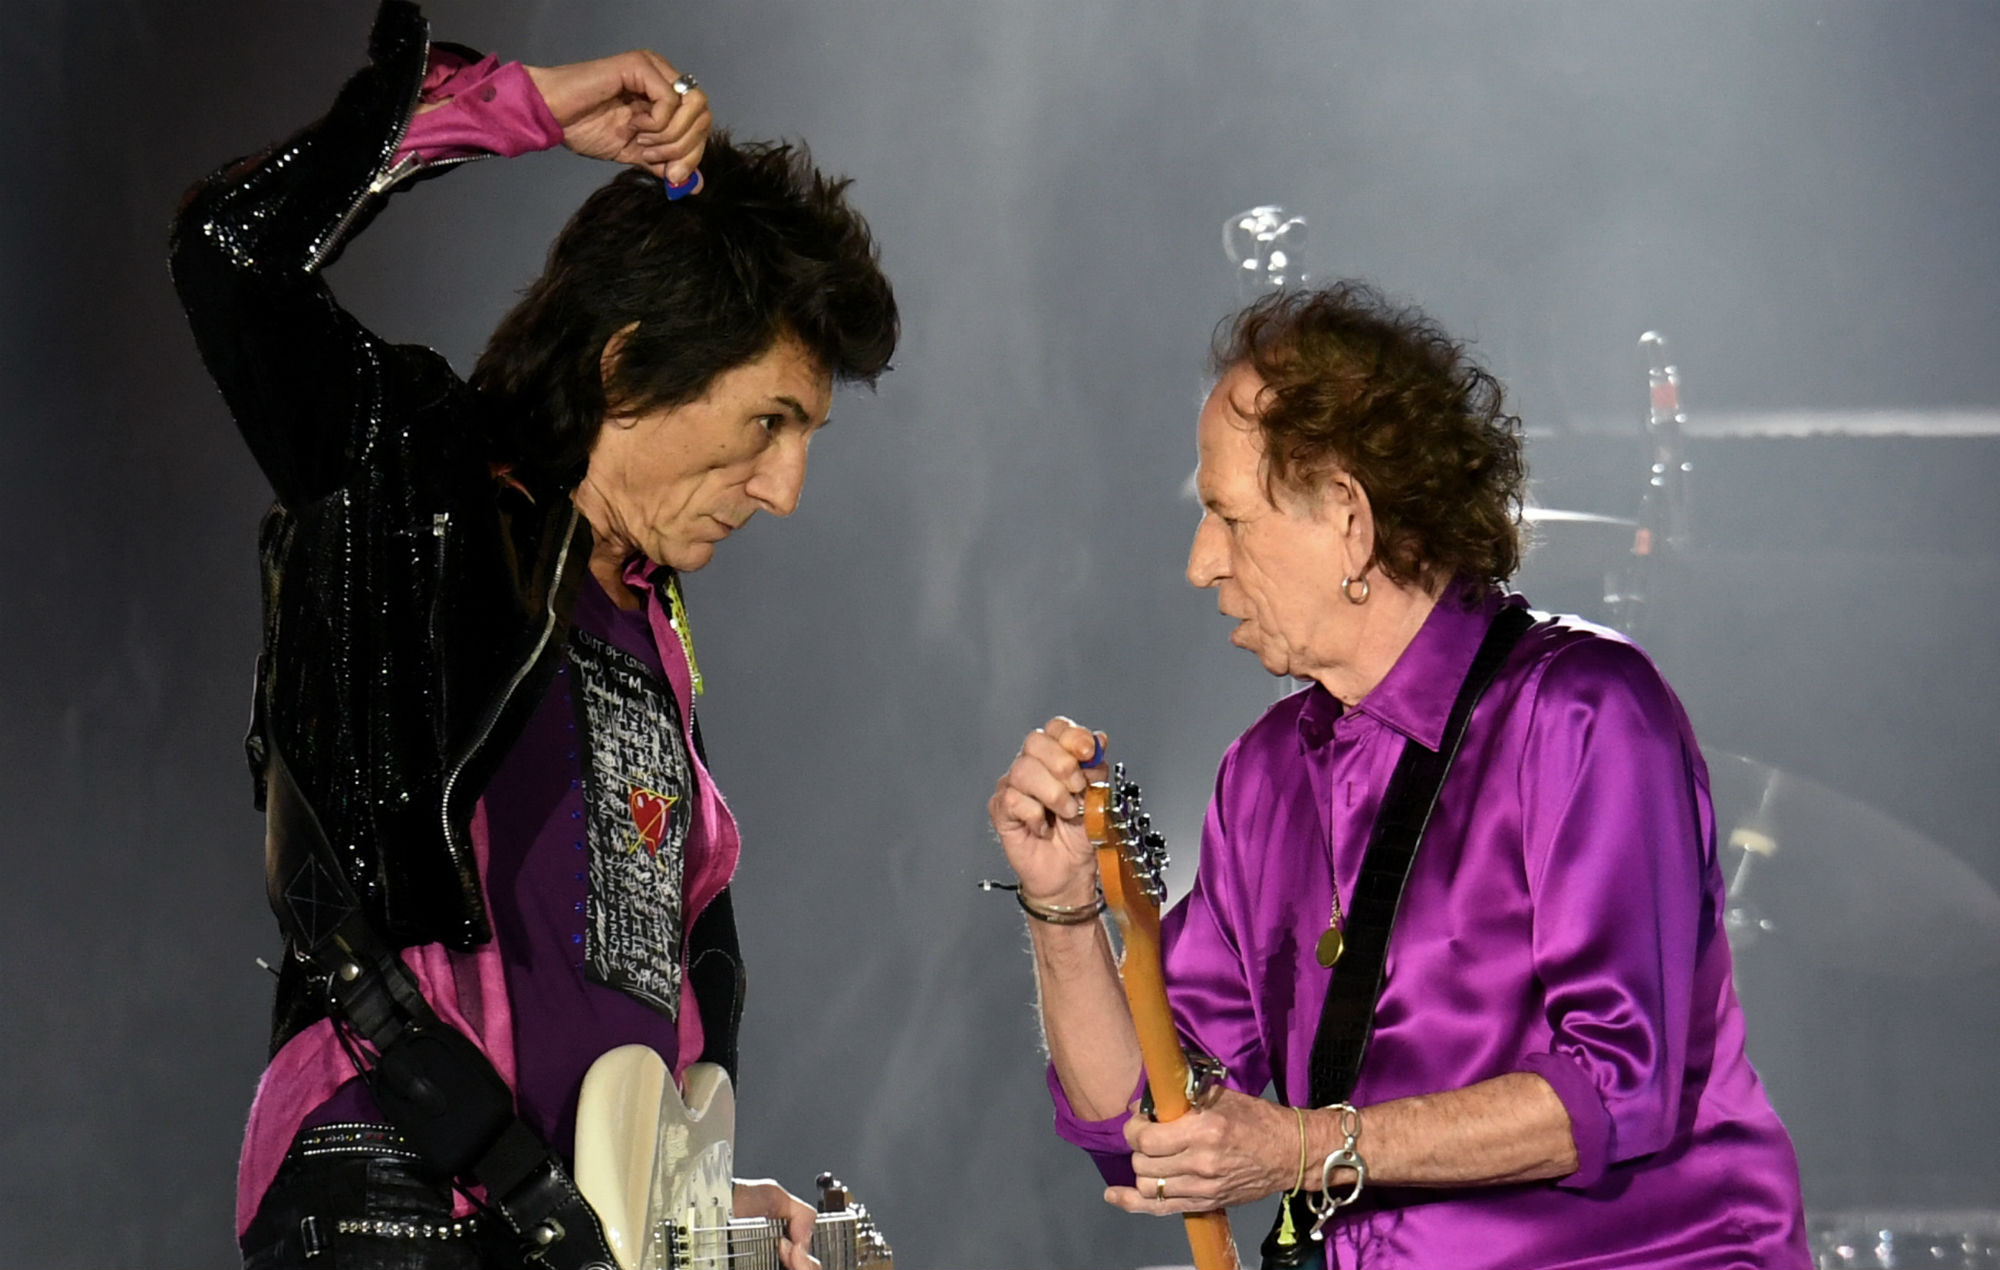 HD wallpaper, Keith Richards, Ronnie Wood, Branded, 2000X1270 Hd Desktop, Desktop Hd Ronnie Wood Background Image